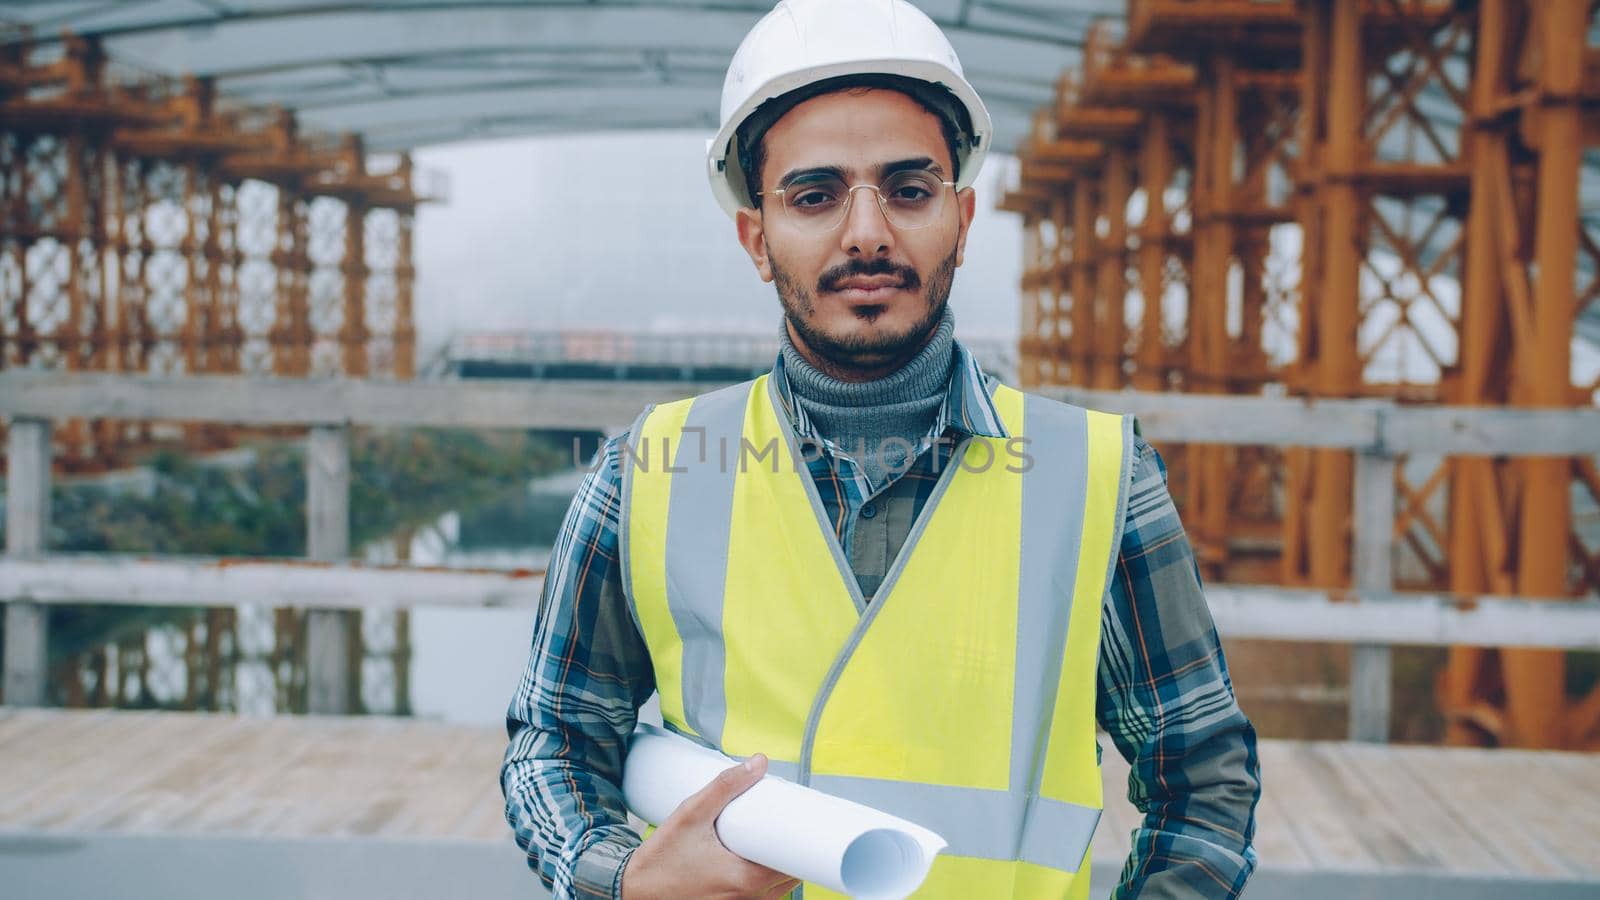 portrait of Arab construction specialist in helmet standing in building site holding plan and looking at camera. People and industry concept.